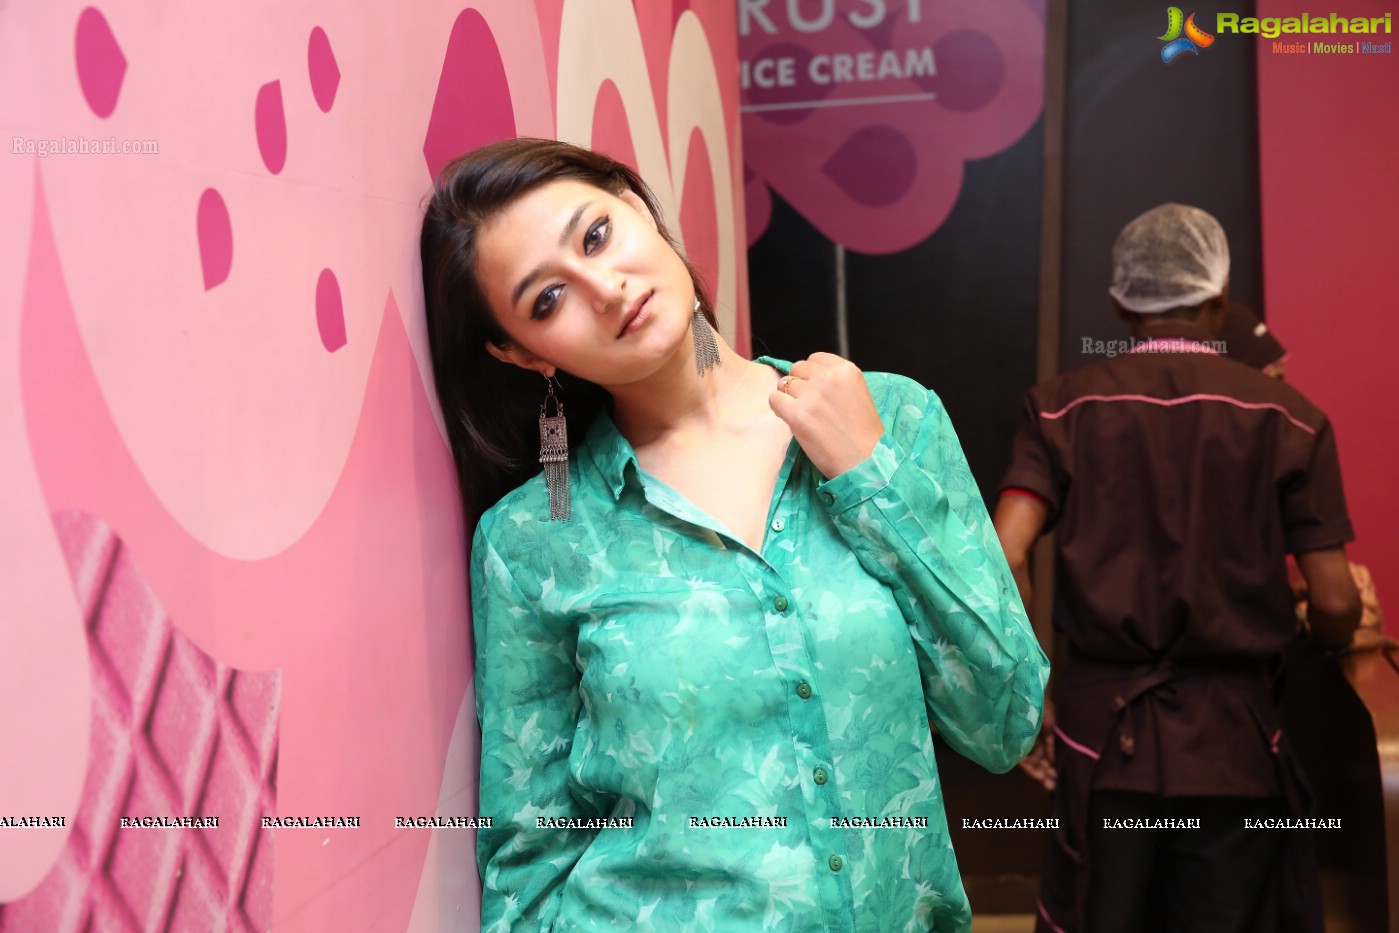 Nilofer Haidry (Posters) @ 'Mr.Alphonso', Summer Special Ice Cream Launch at Cream Stone